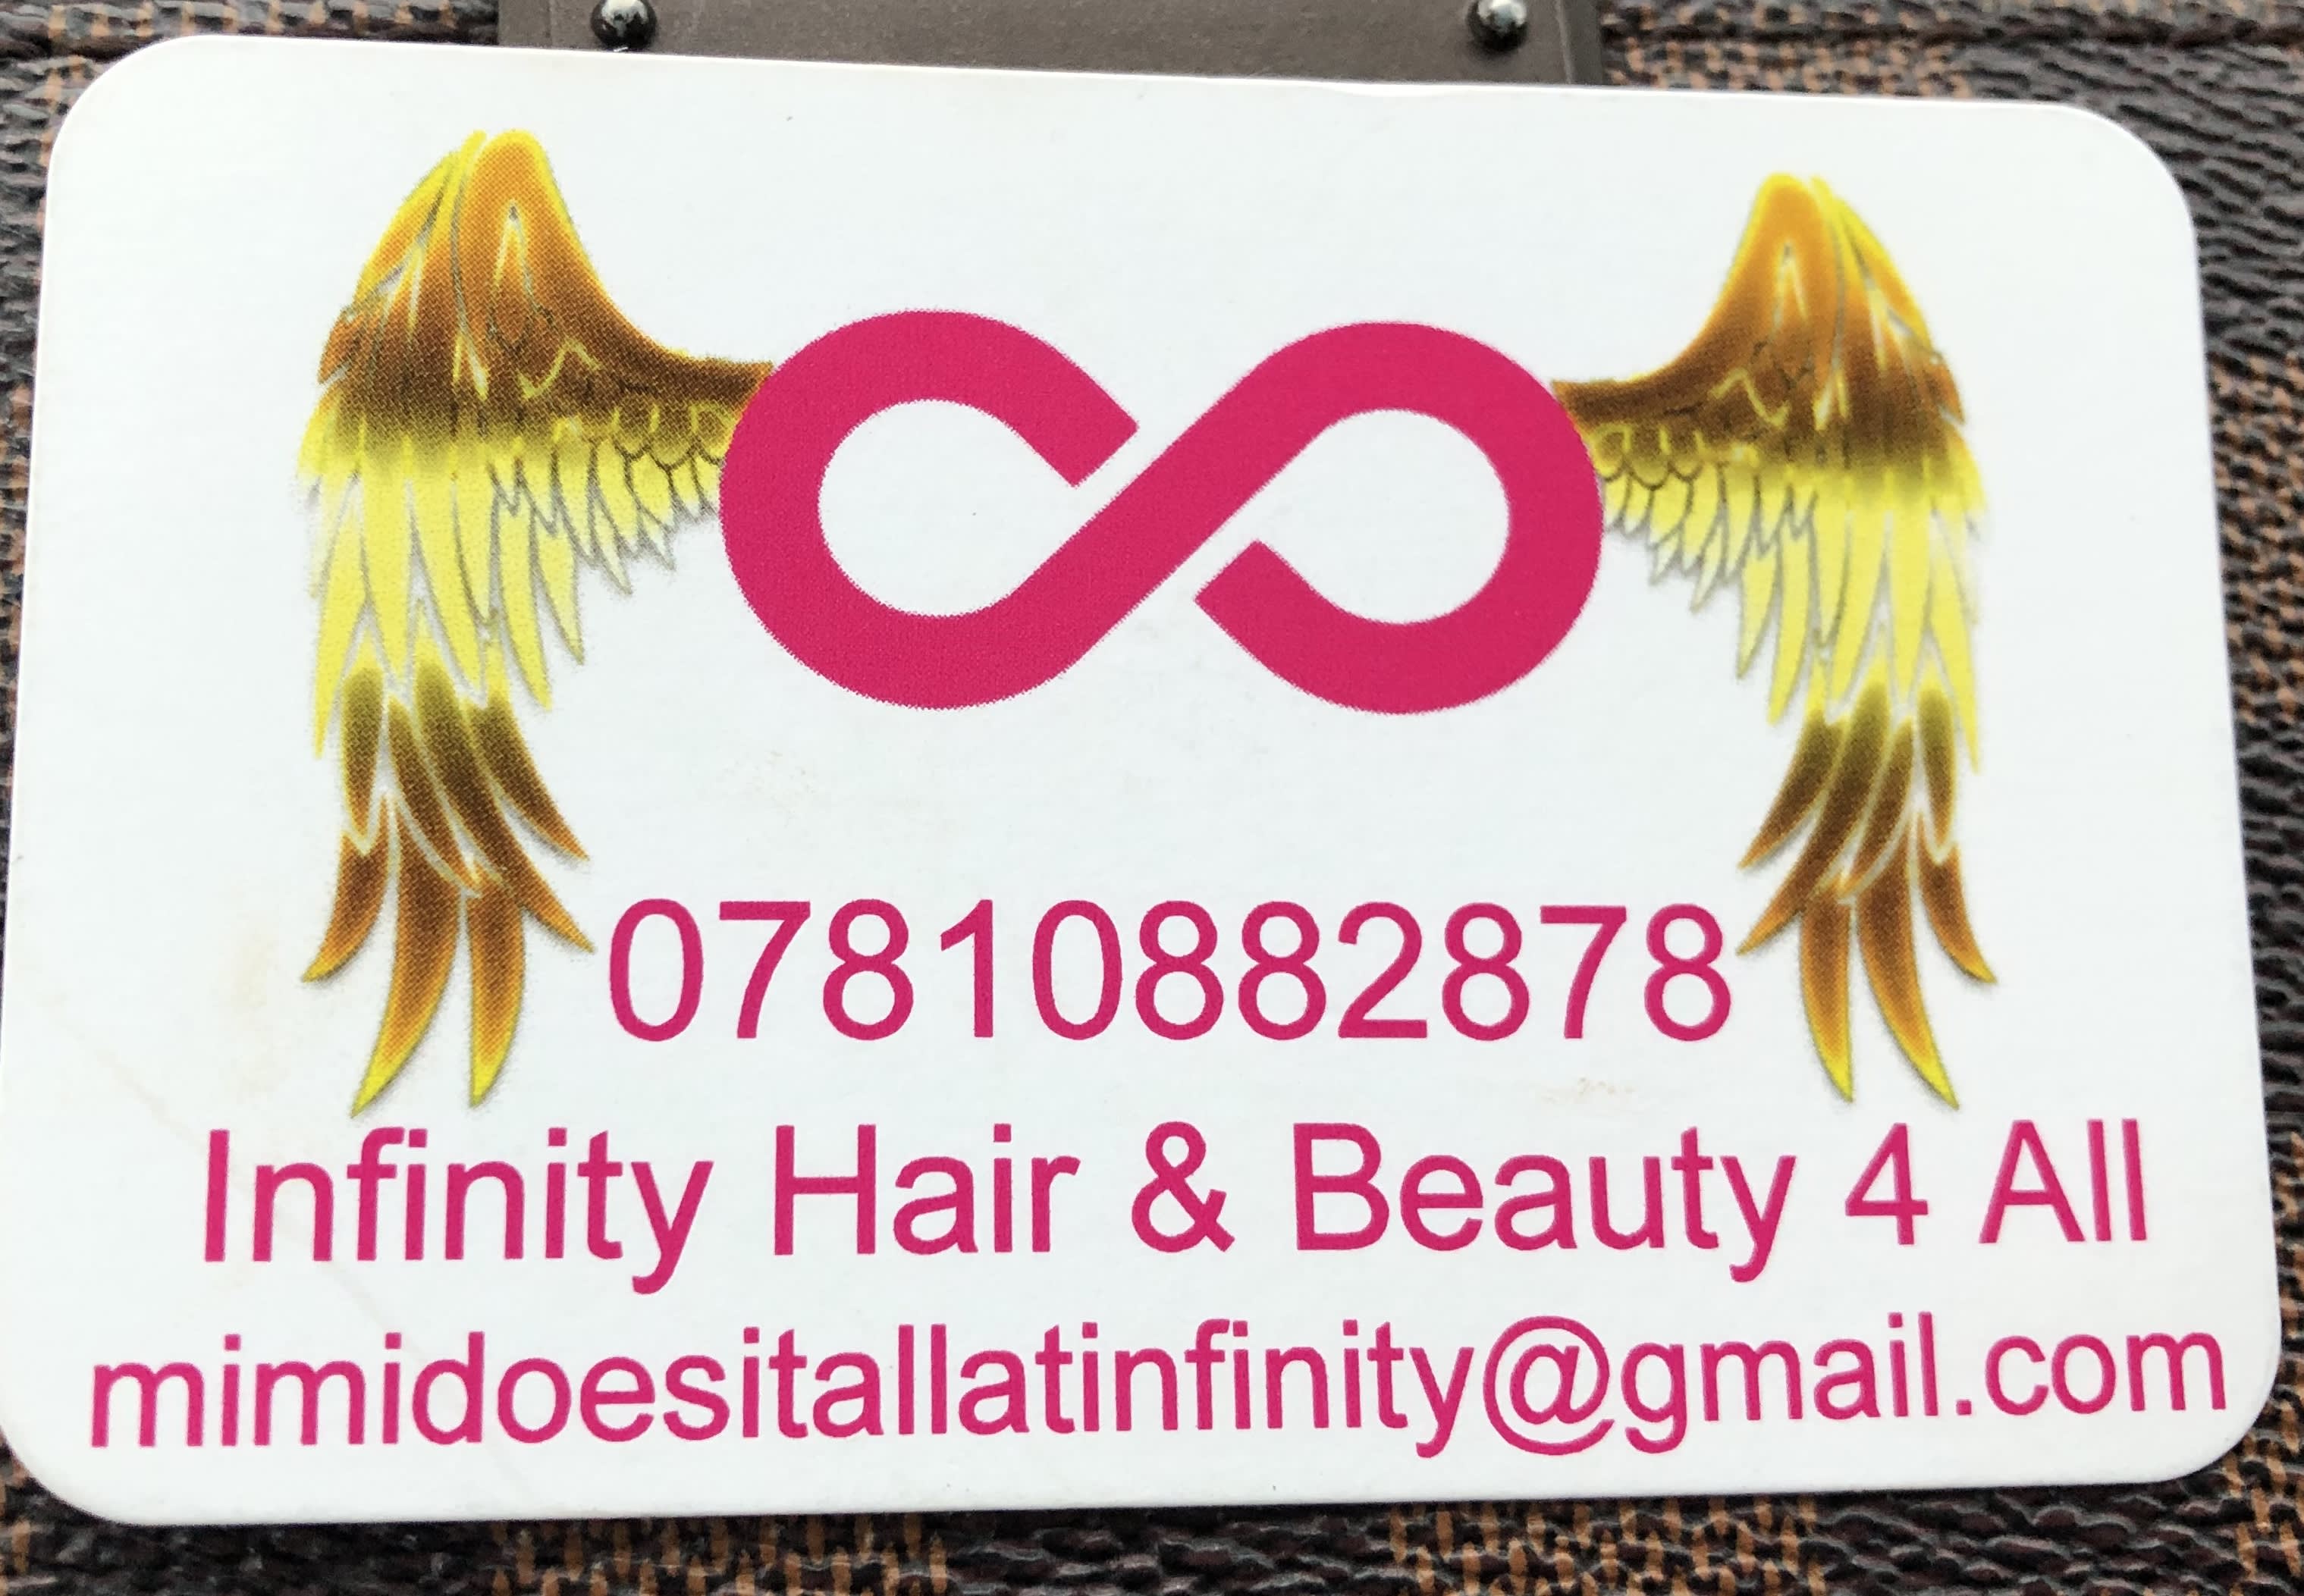 Infinity Hair & beauty 4 All Somerset